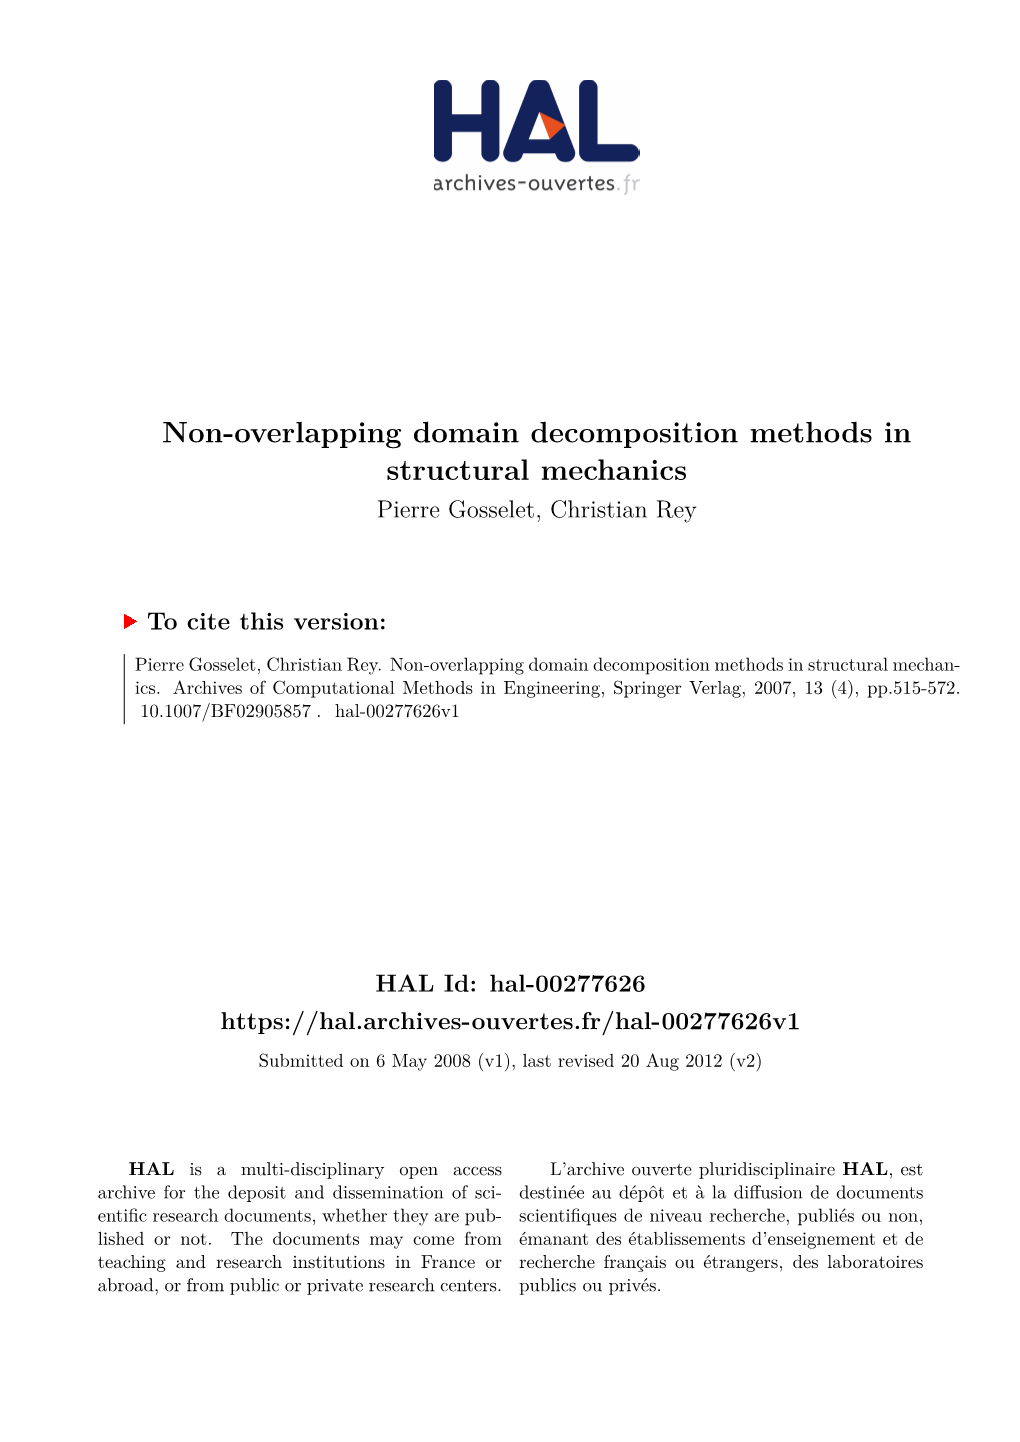 Non-Overlapping Domain Decomposition Methods in Structural Mechanics Pierre Gosselet, Christian Rey